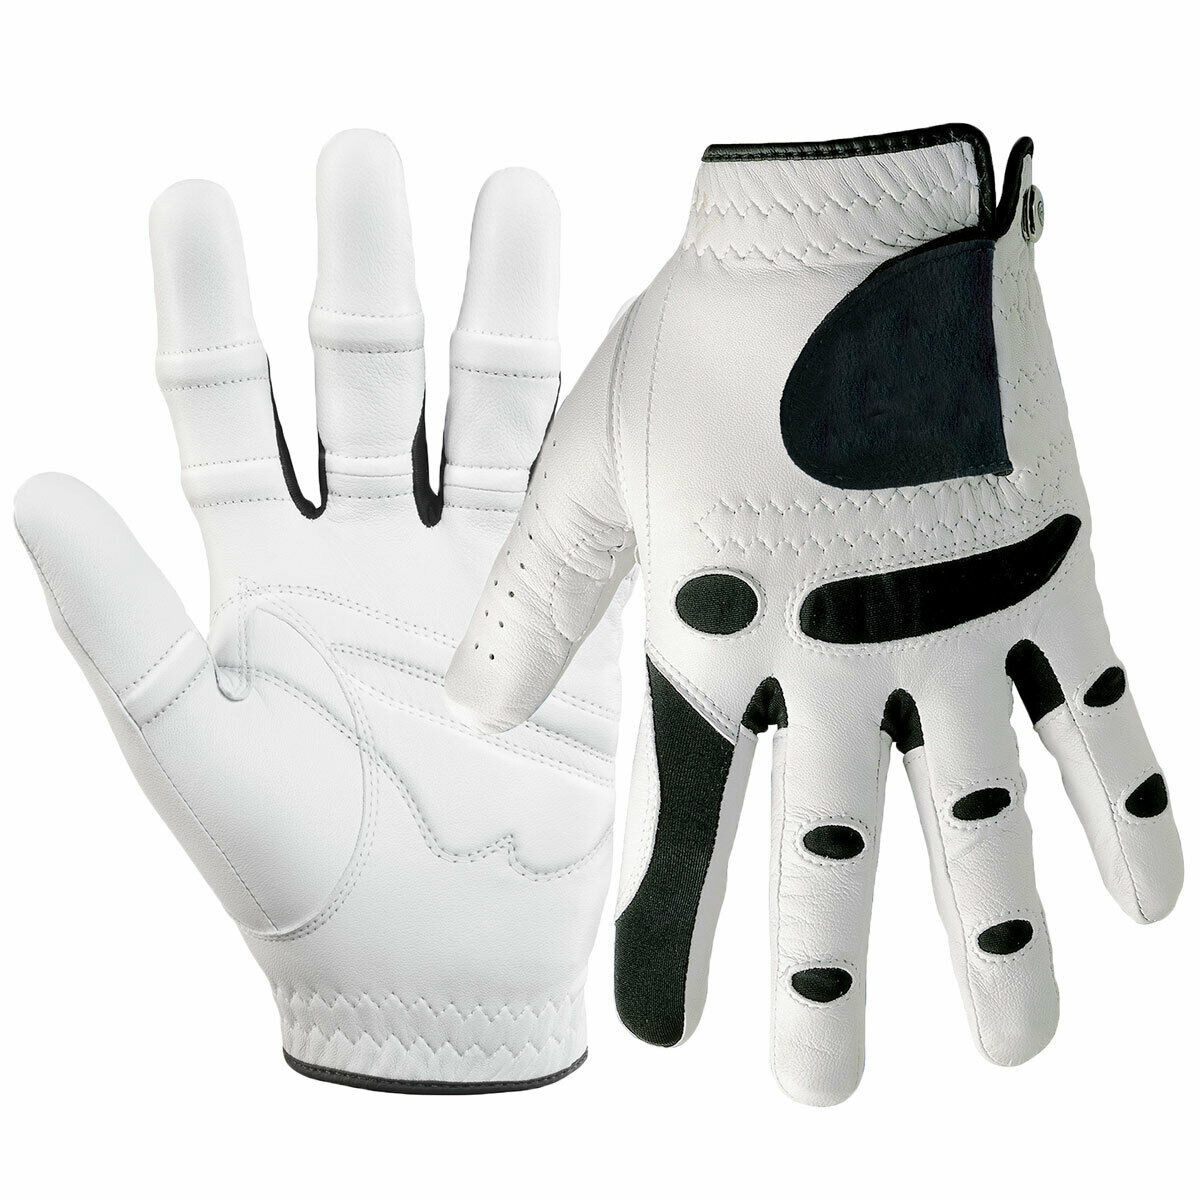 Men soft sheep leather elastic fabric durable&breathable golf gloves